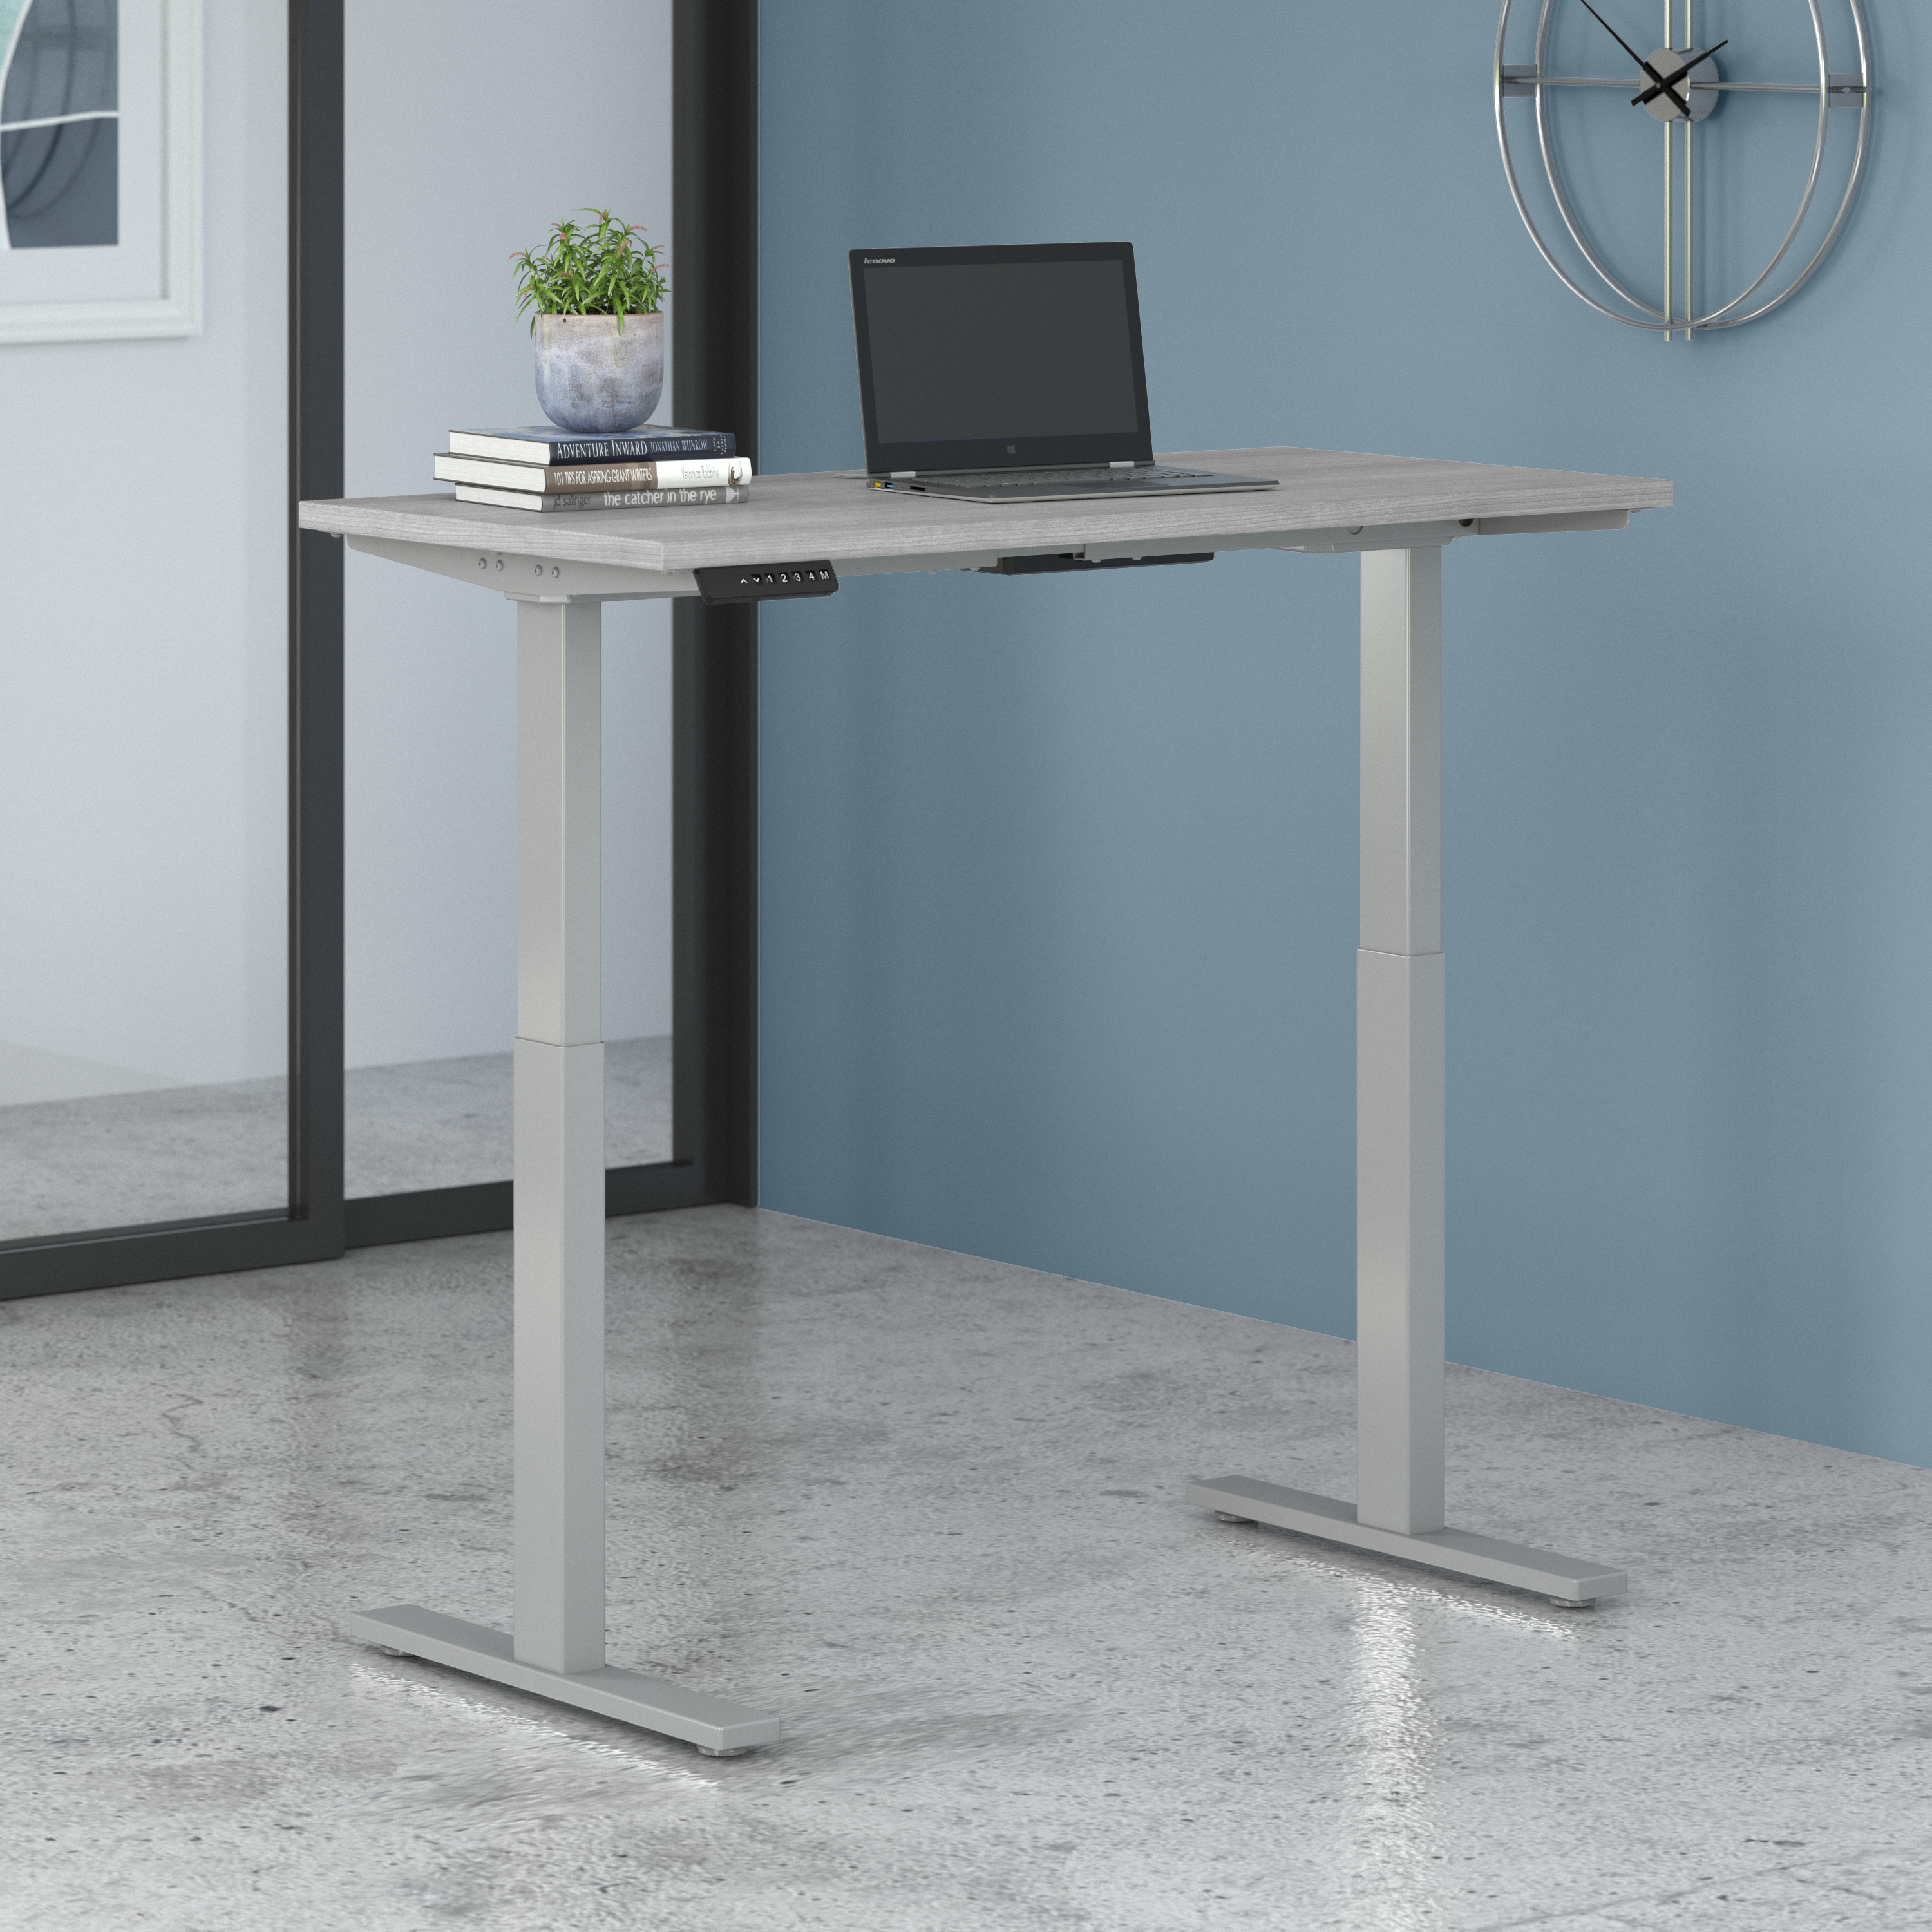 Shop Move 60 Series by Bush Business Furniture 48W x 24D Electric Height Adjustable Standing Desk 01 M6S4824PGSK #color_platinum gray/cool gray metallic